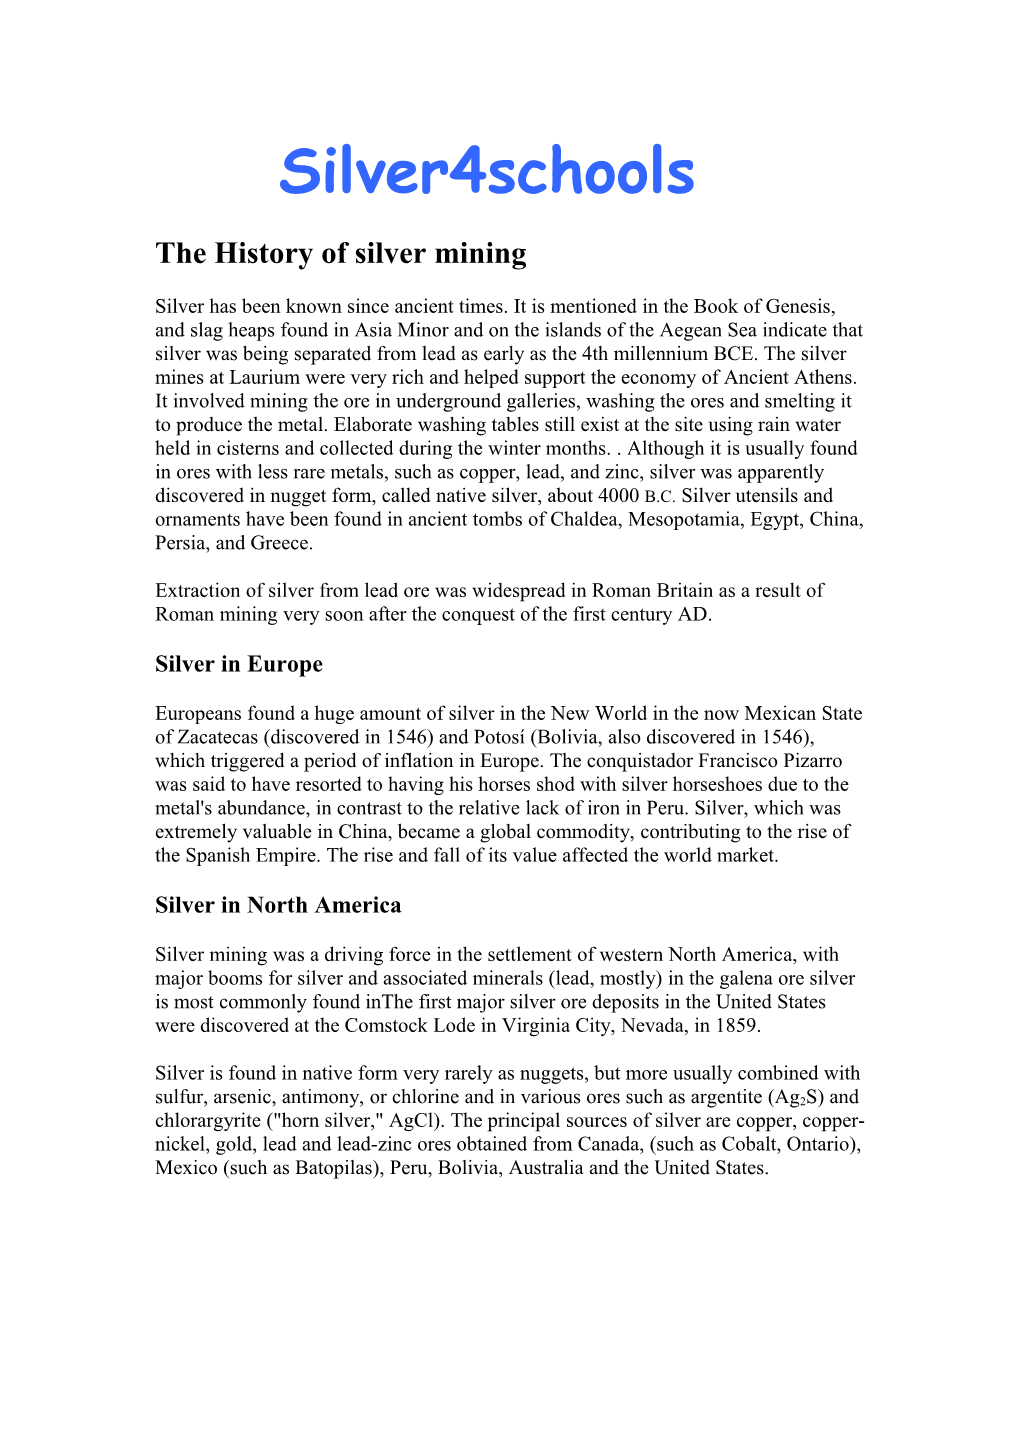 The History of Silver Mining